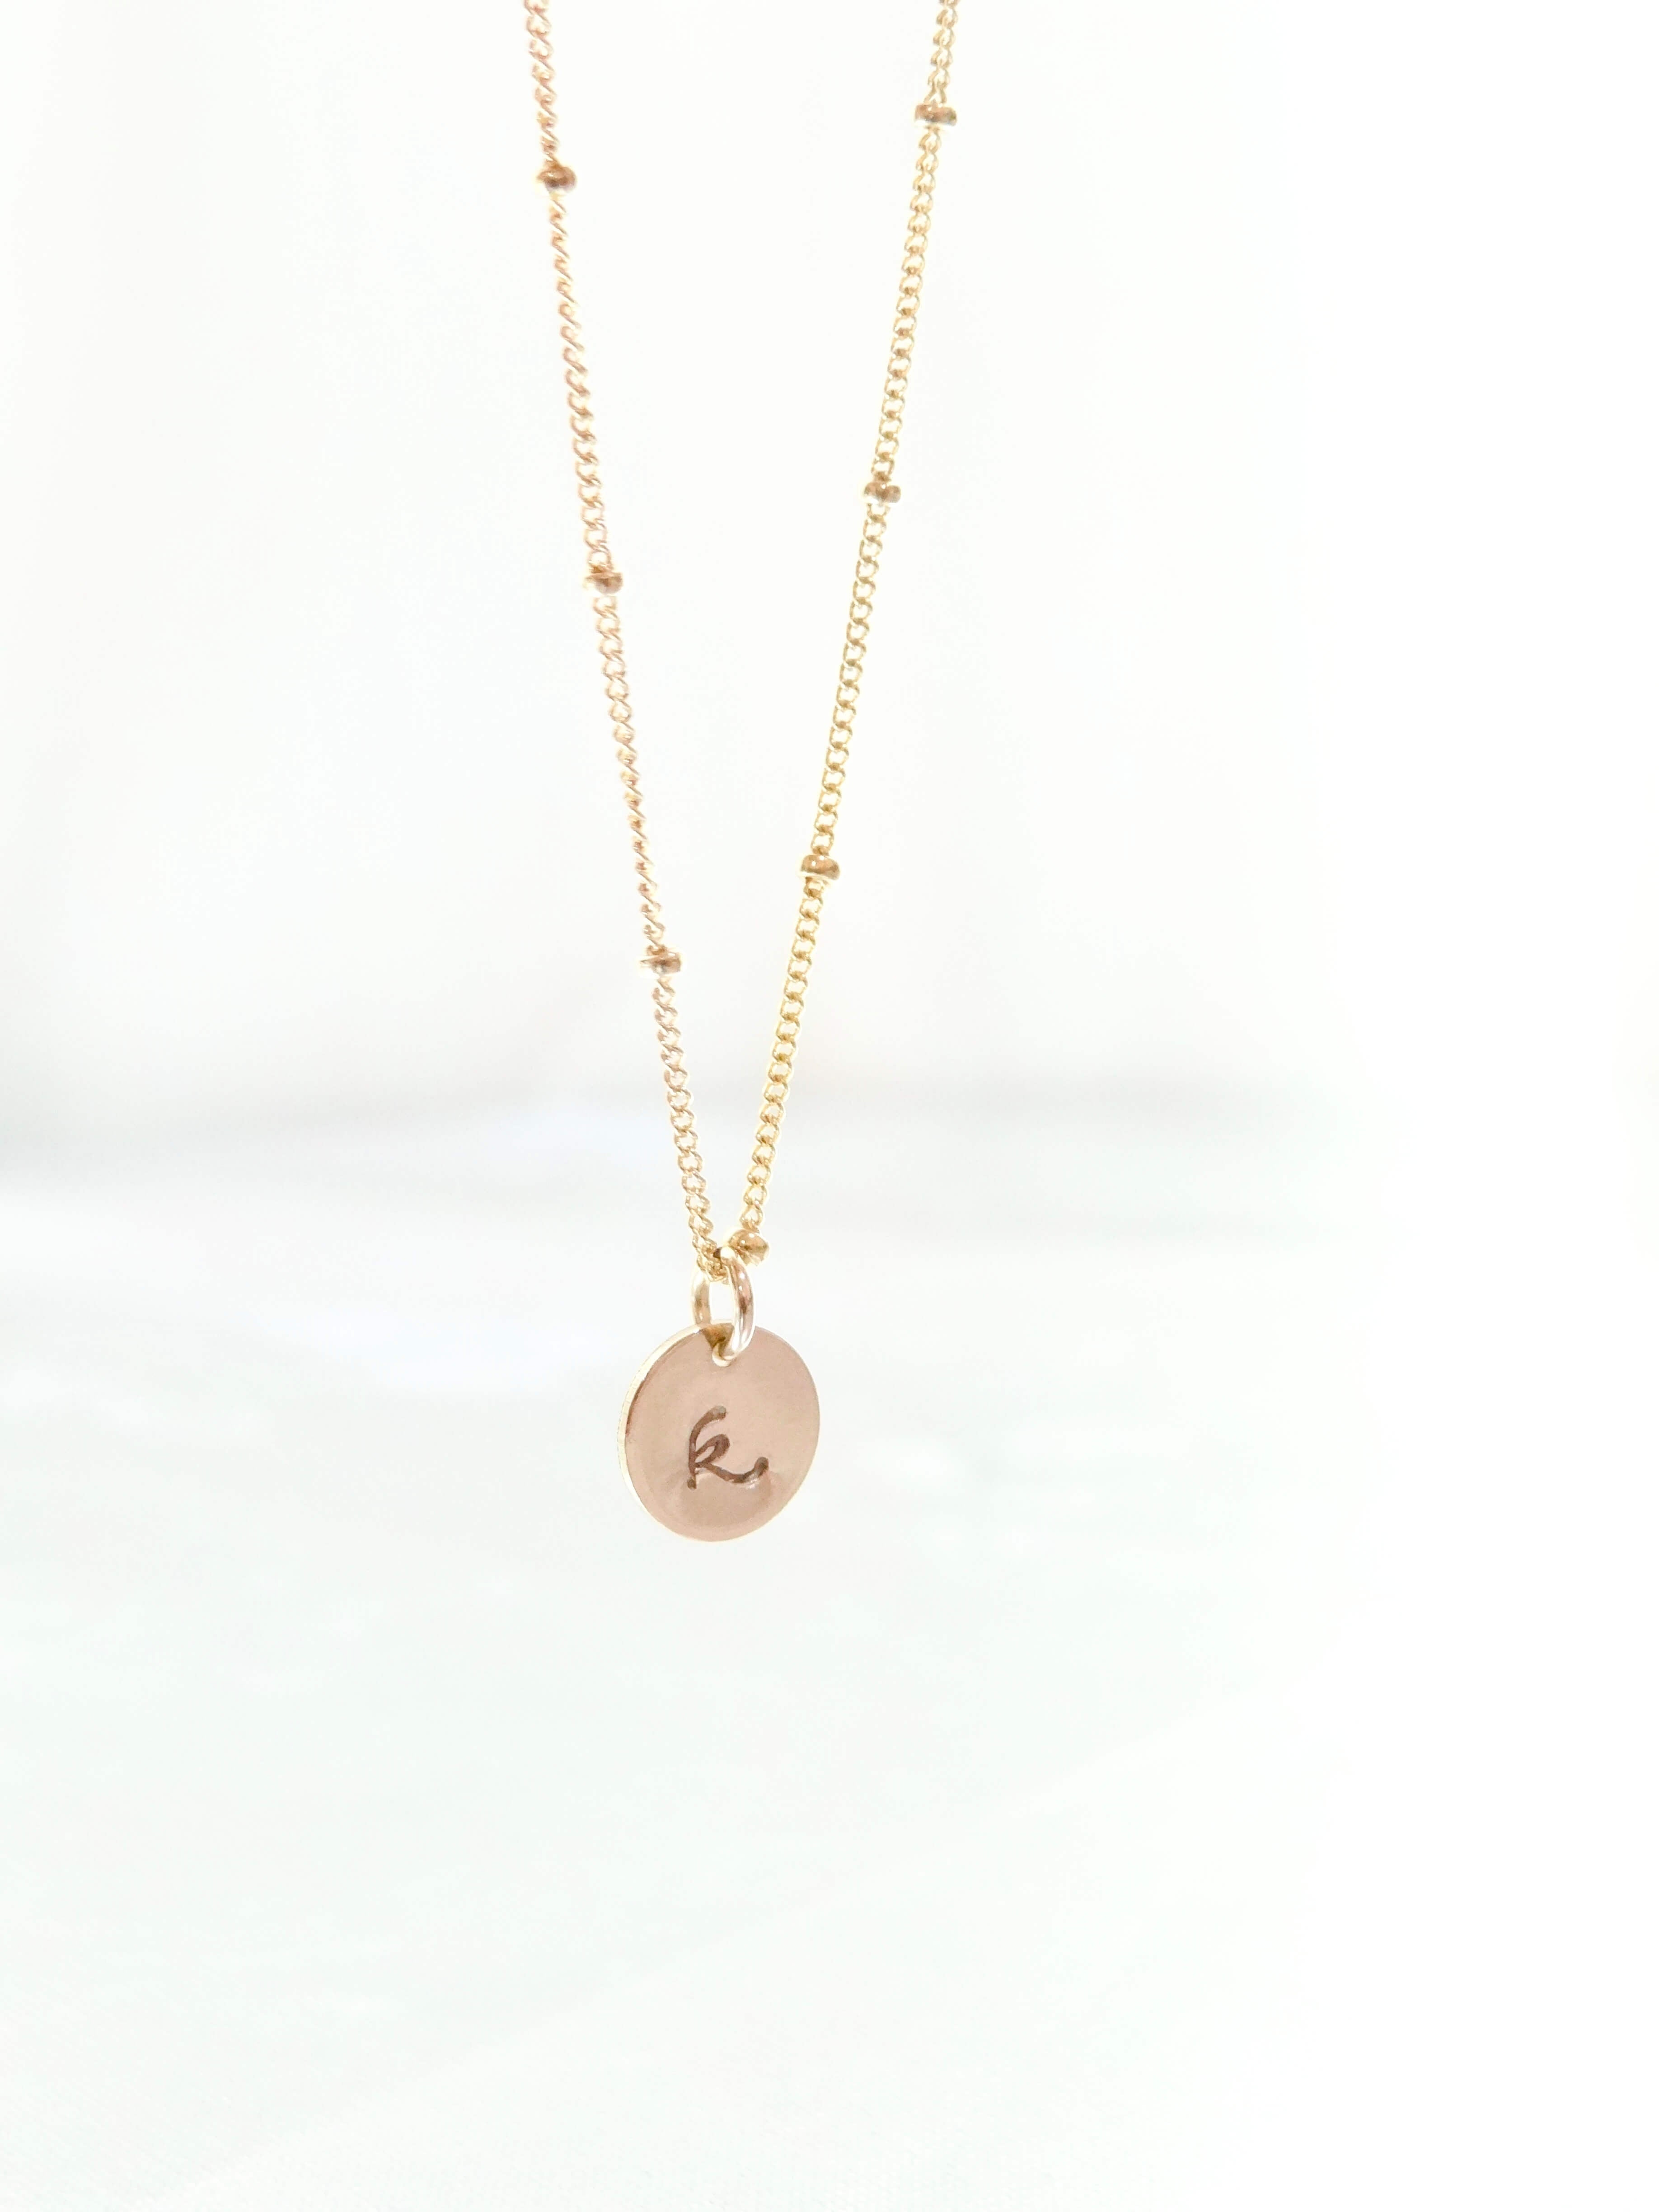 gold filled round disc pendant charm necklace